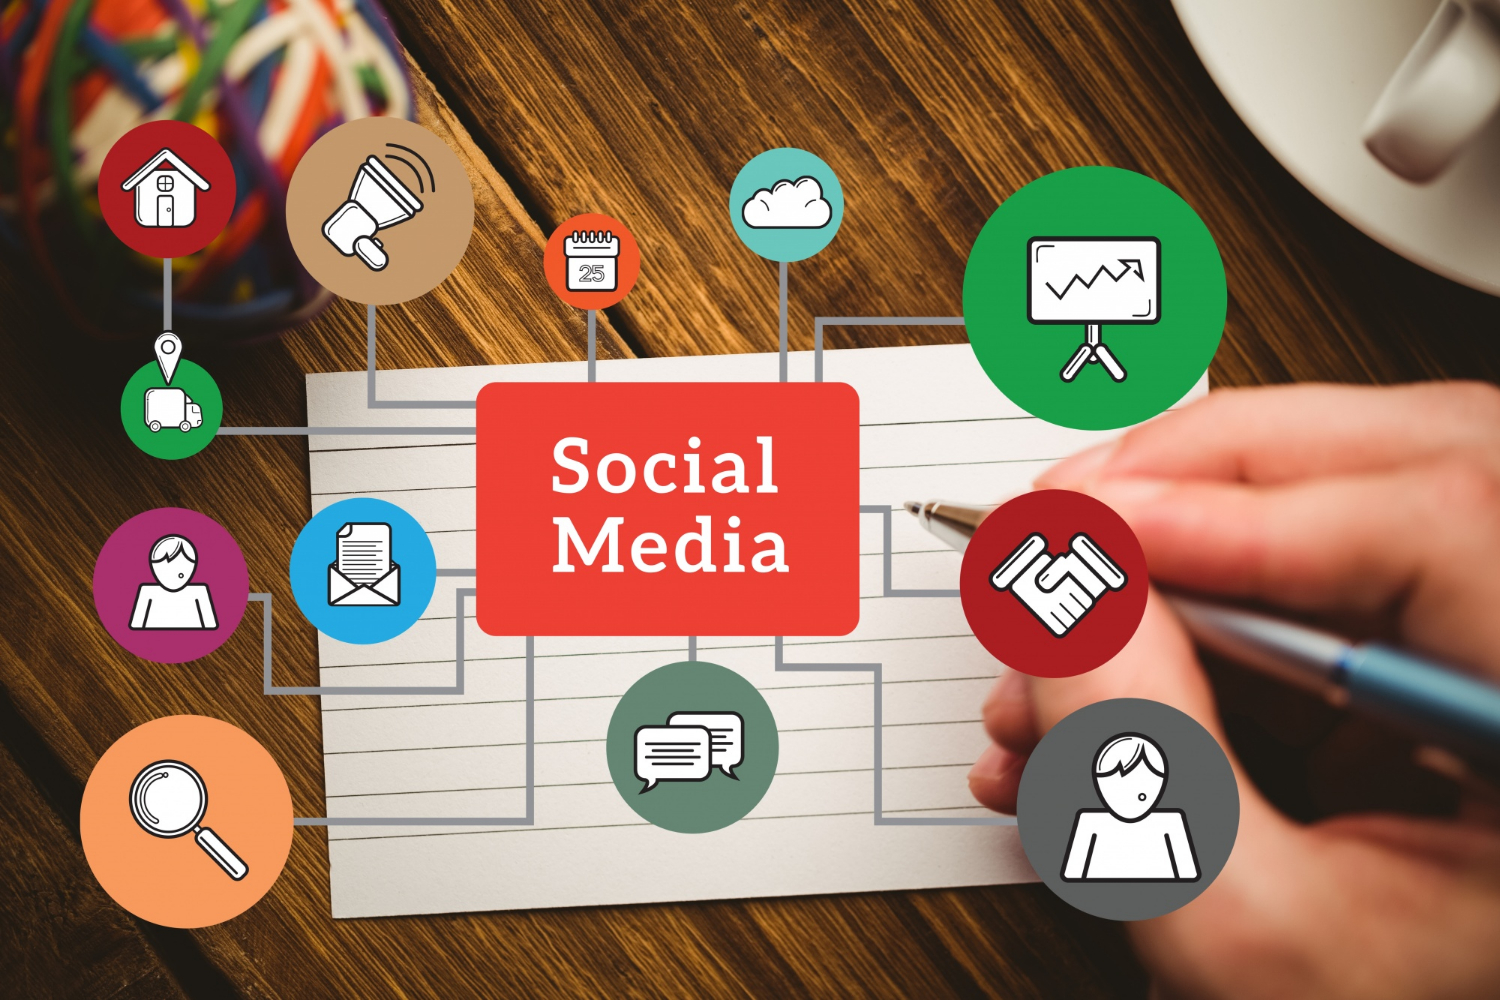 Augment your social media marketing strategy with these tips